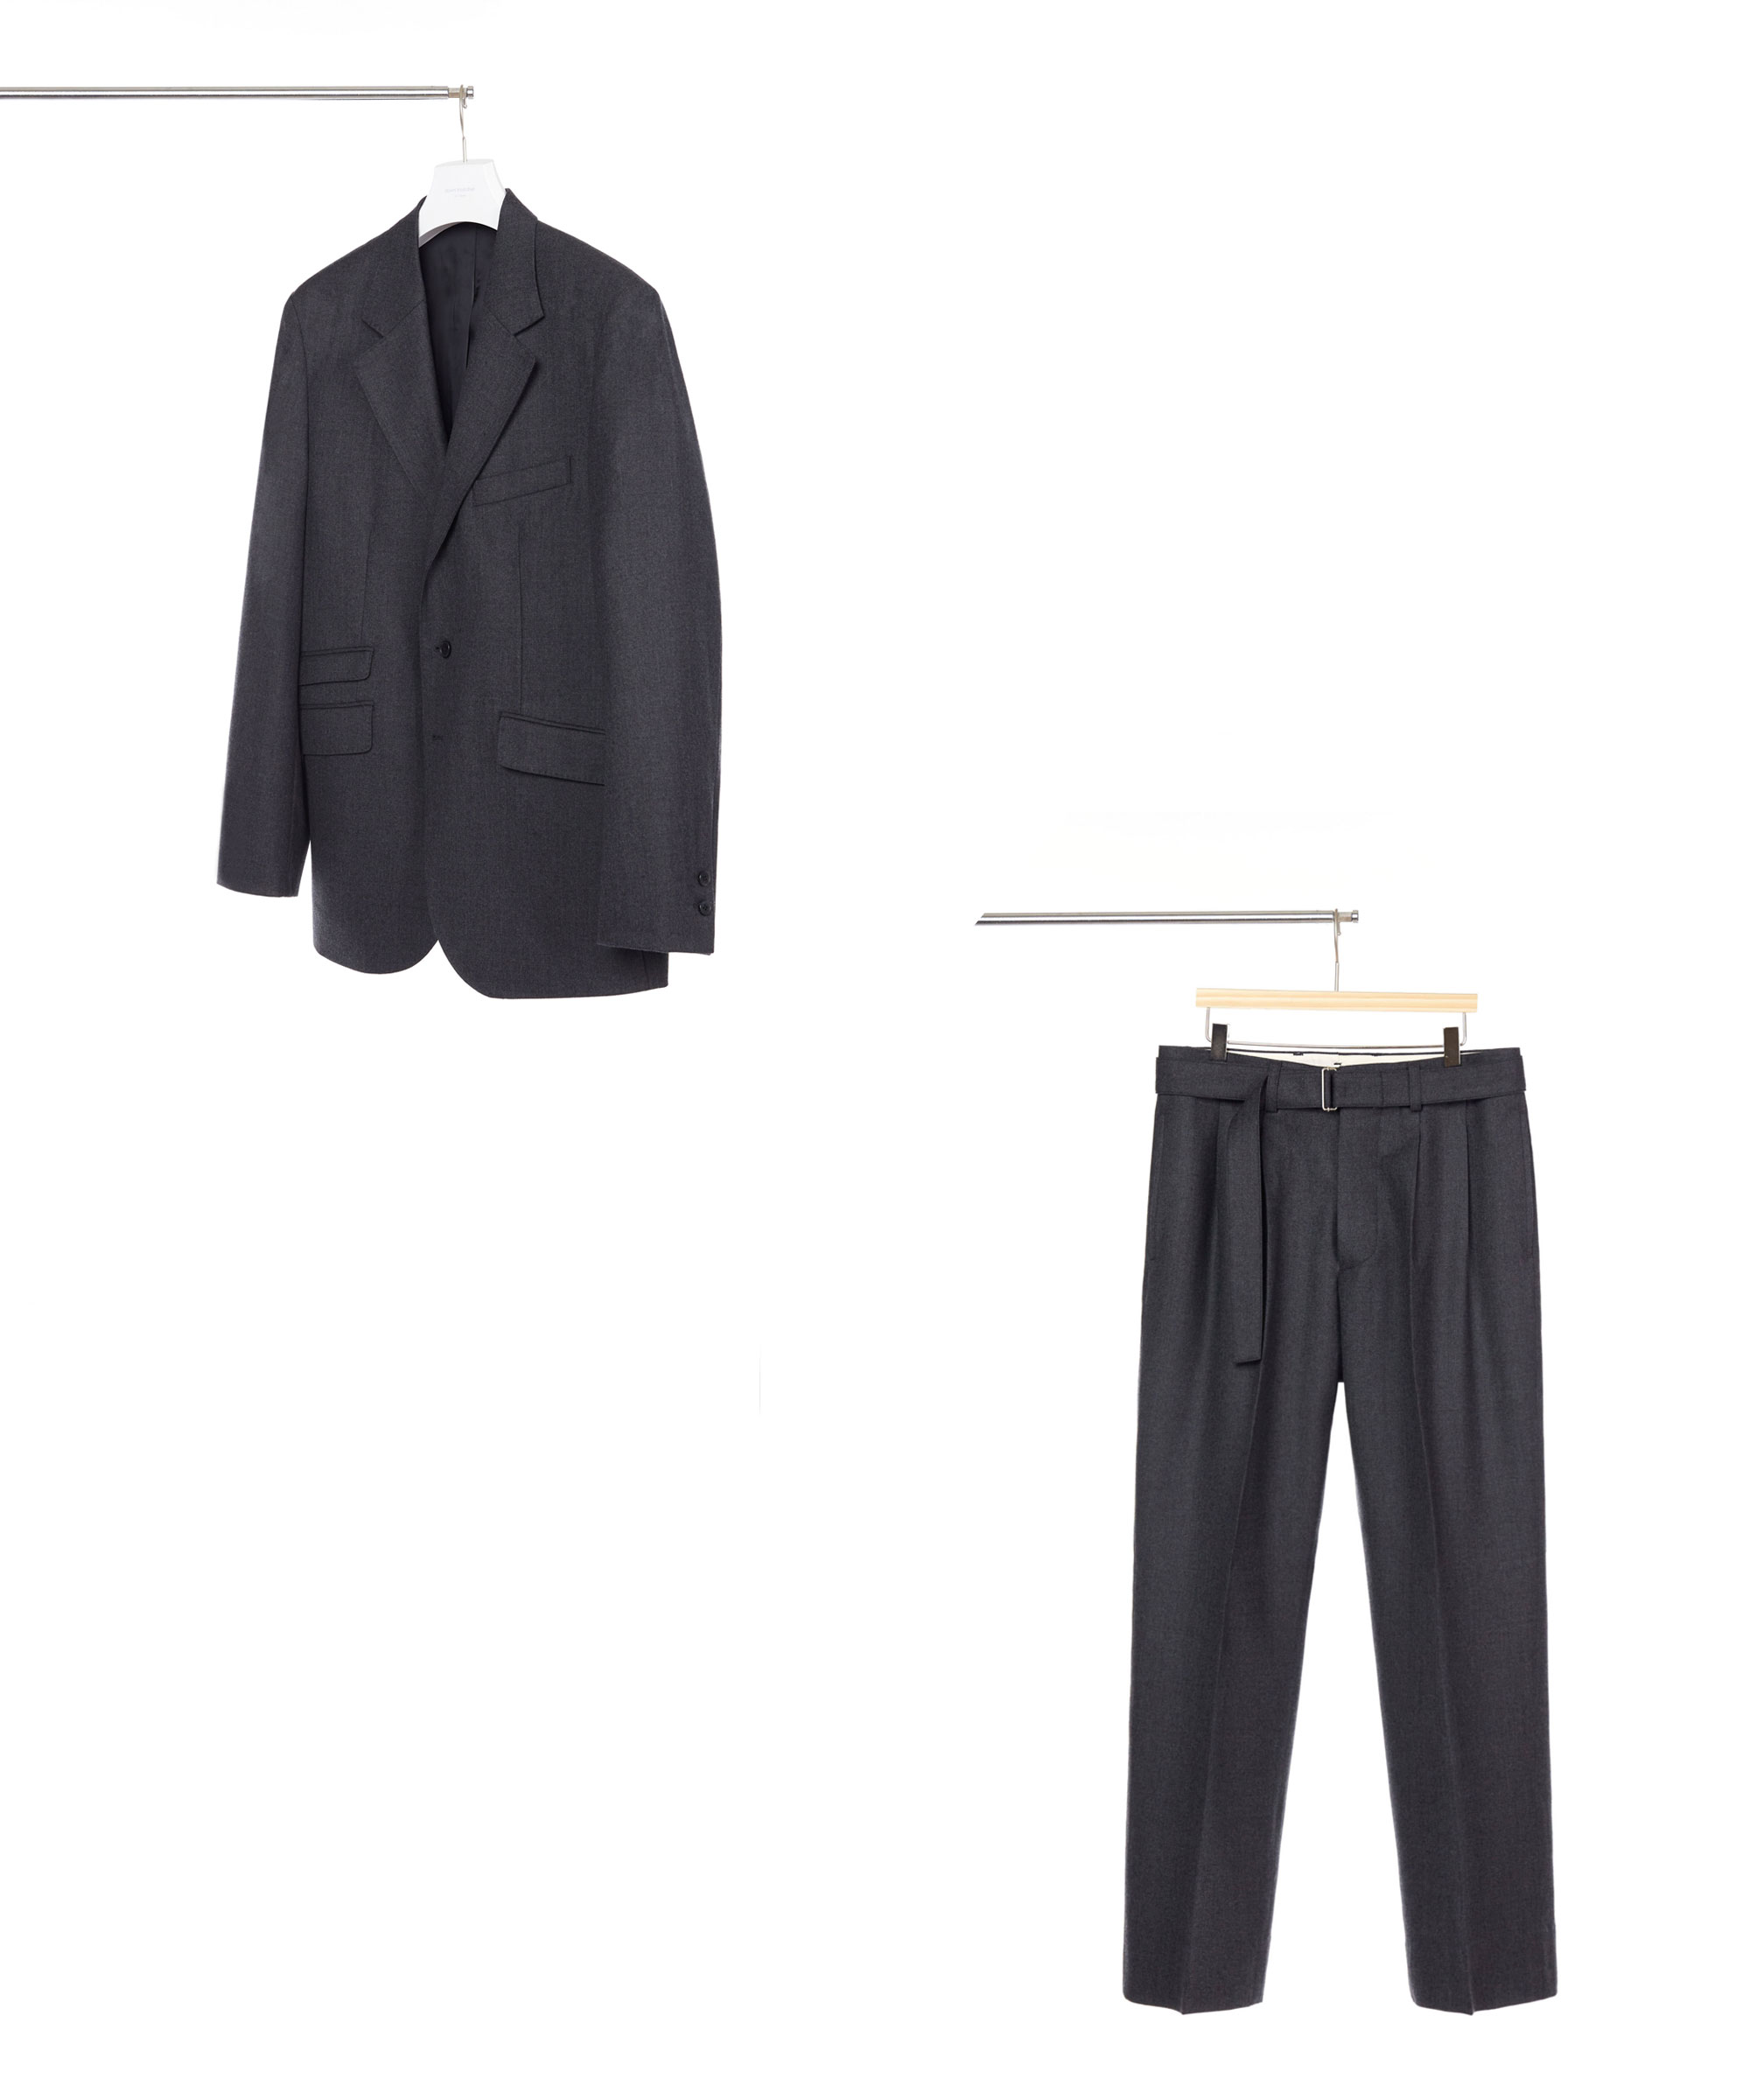 [SET-UP] SUPER 160S HIGHLAND WOOL FLANNEL CHARCOAL 3ROLL 2BUTTON TAILORED BLAZER / BELTED PANTS 02-2